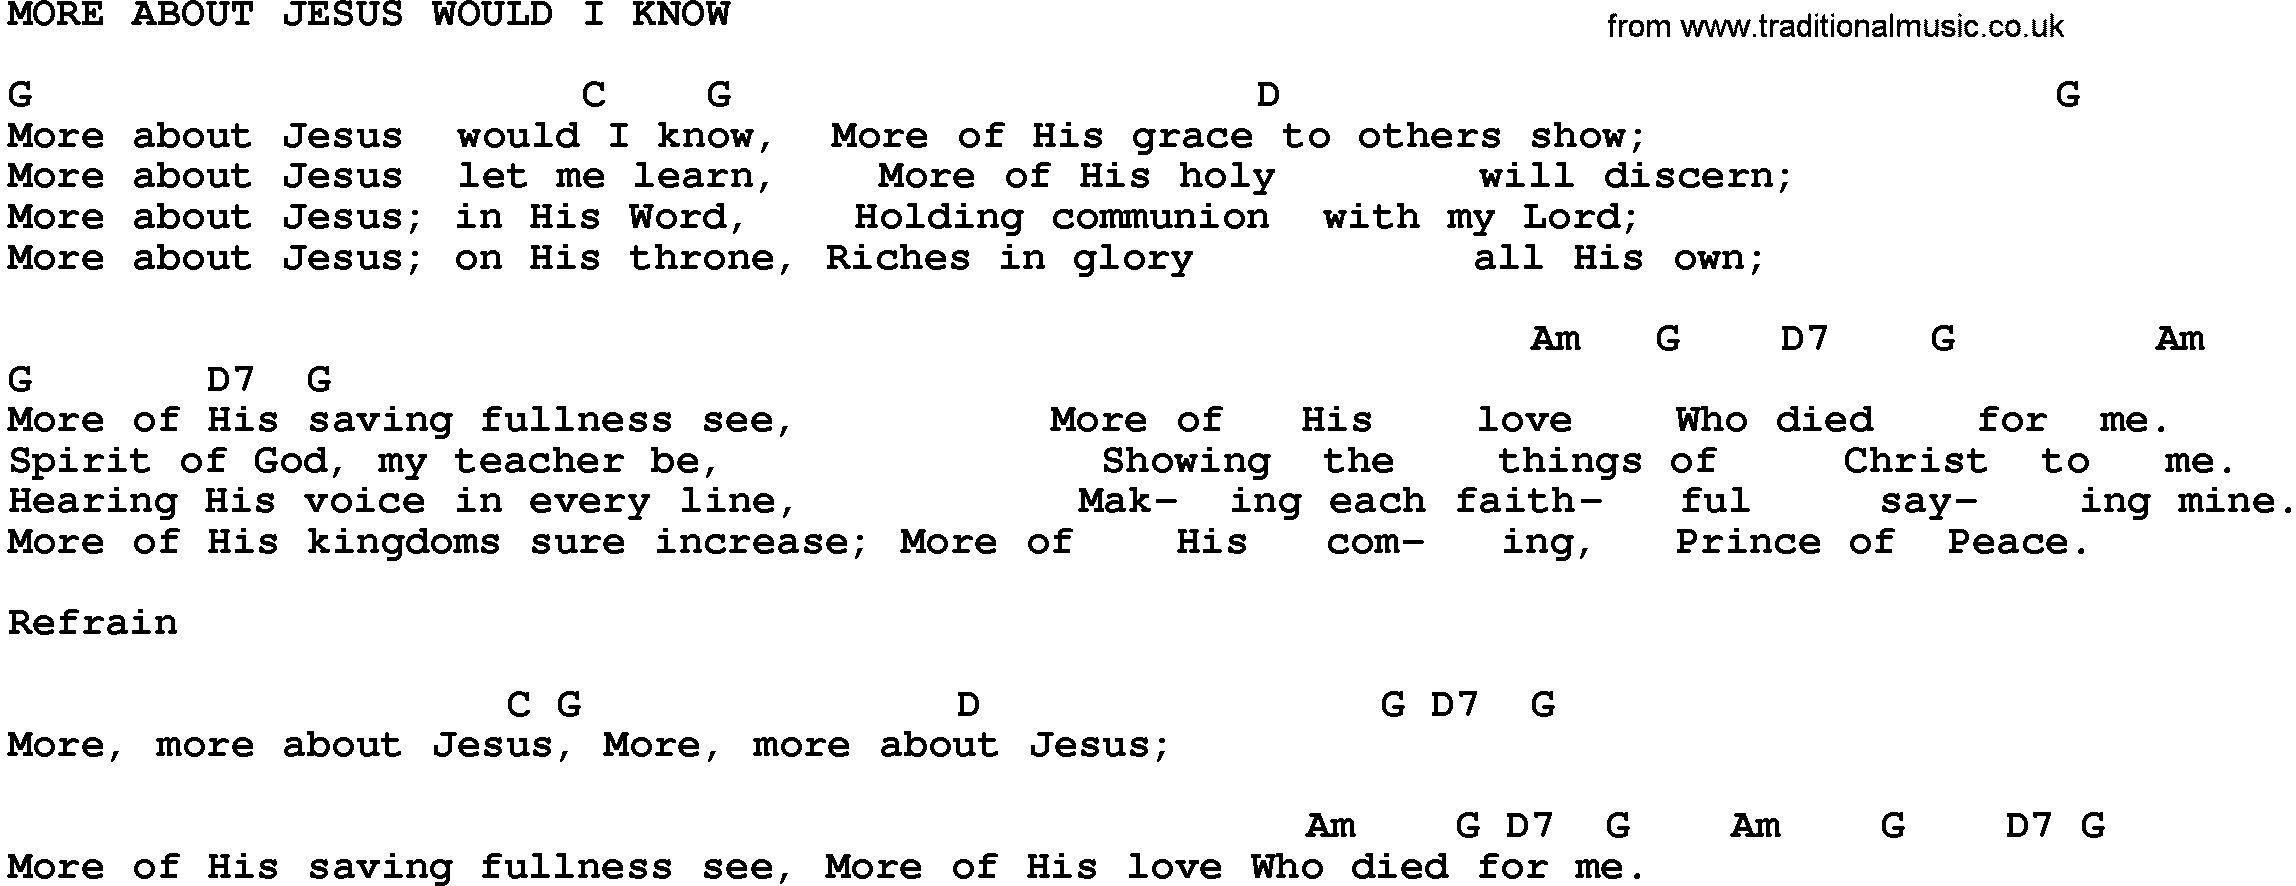 Gospel Song: More About Jesus Would I Know-Trad, lyrics and chords.